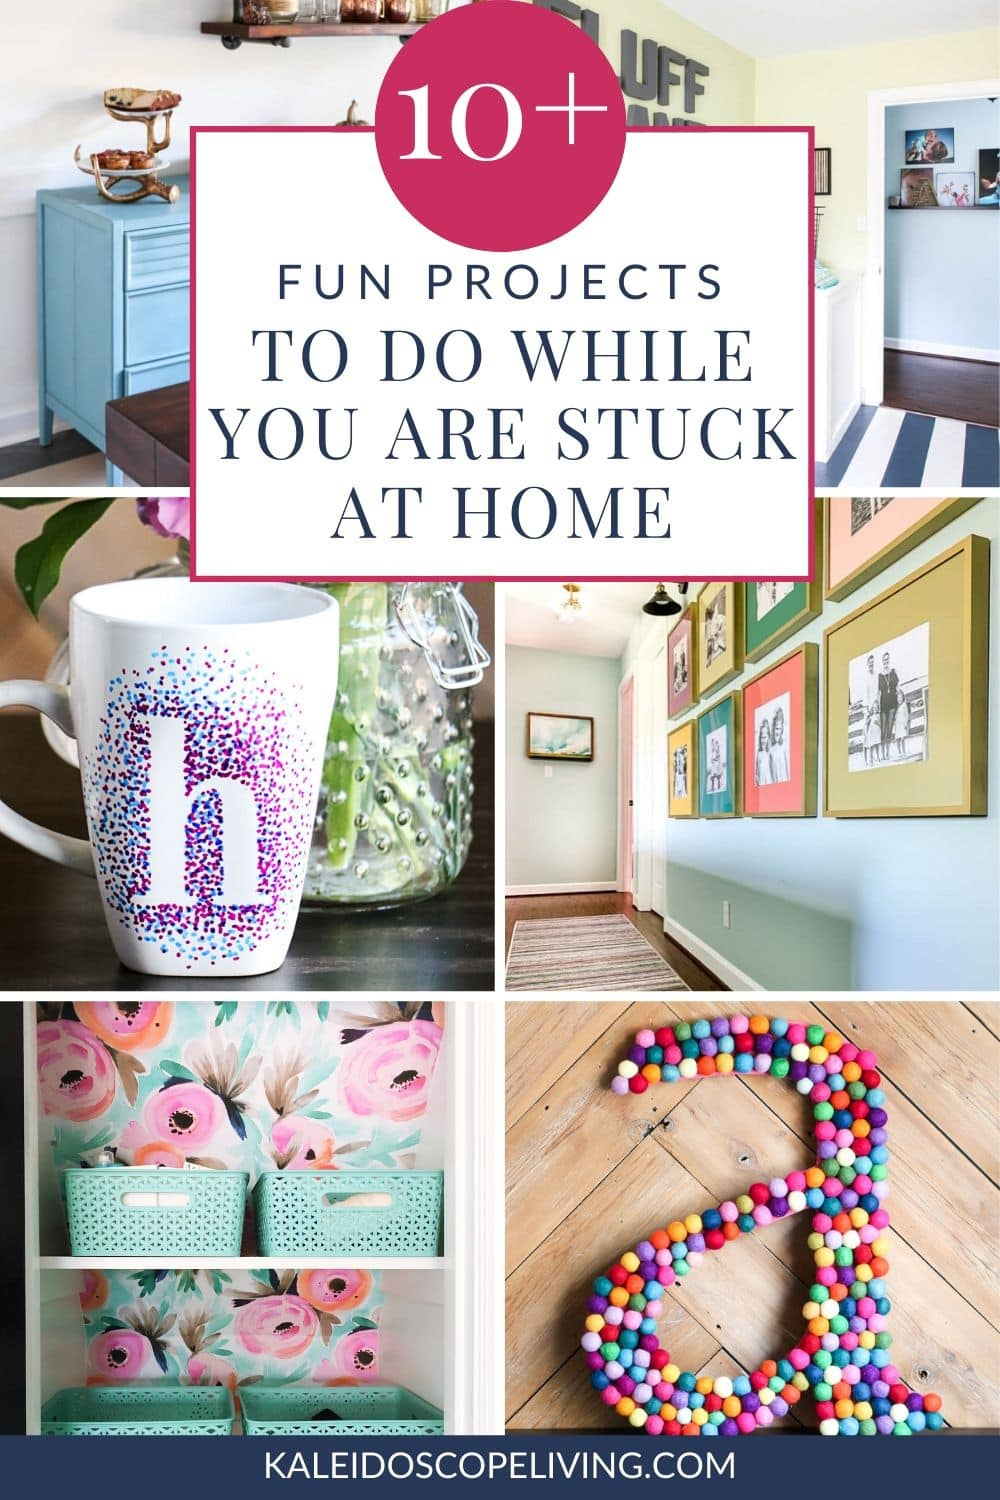 17 Easy DIY Projects to Do While You're Stuck At Home | Kaleidoscope Living -   18 diy projects for the home easy ideas